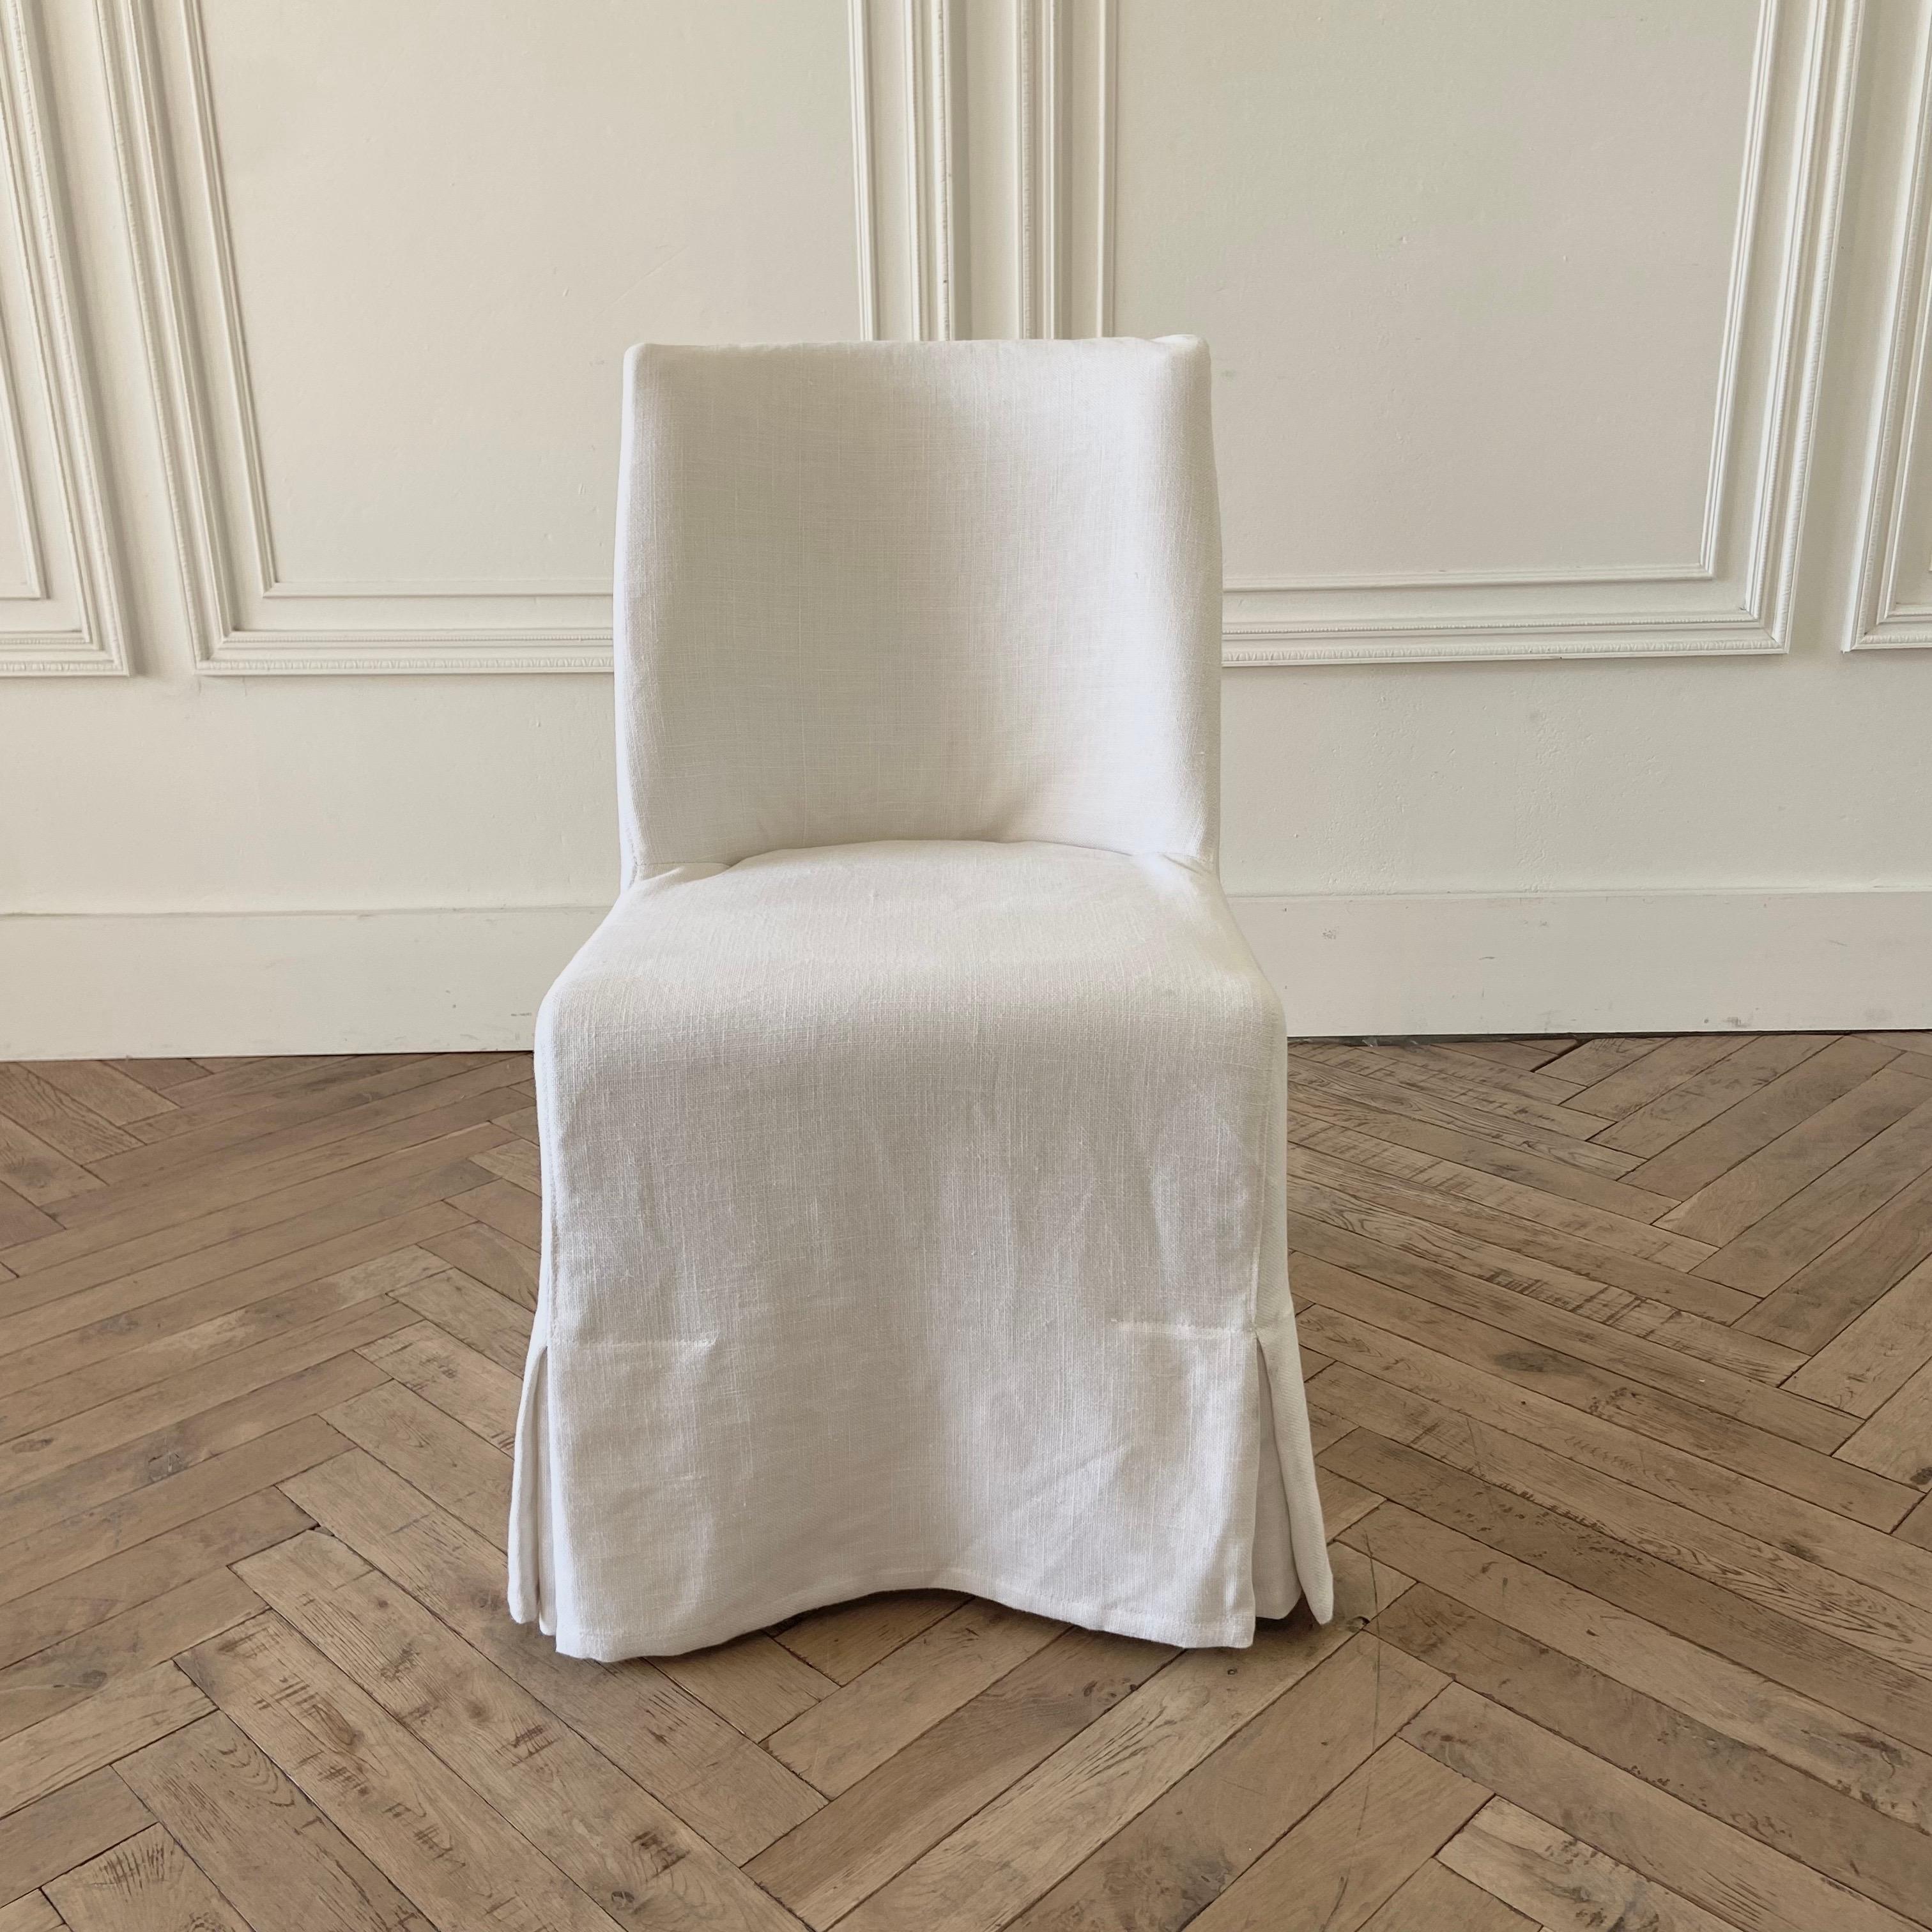 White linen slip covered dining chair
Simple heavy white linen slip covered parson chair.
If not available in stock, please allow 2-4 weeks.
Size: 19